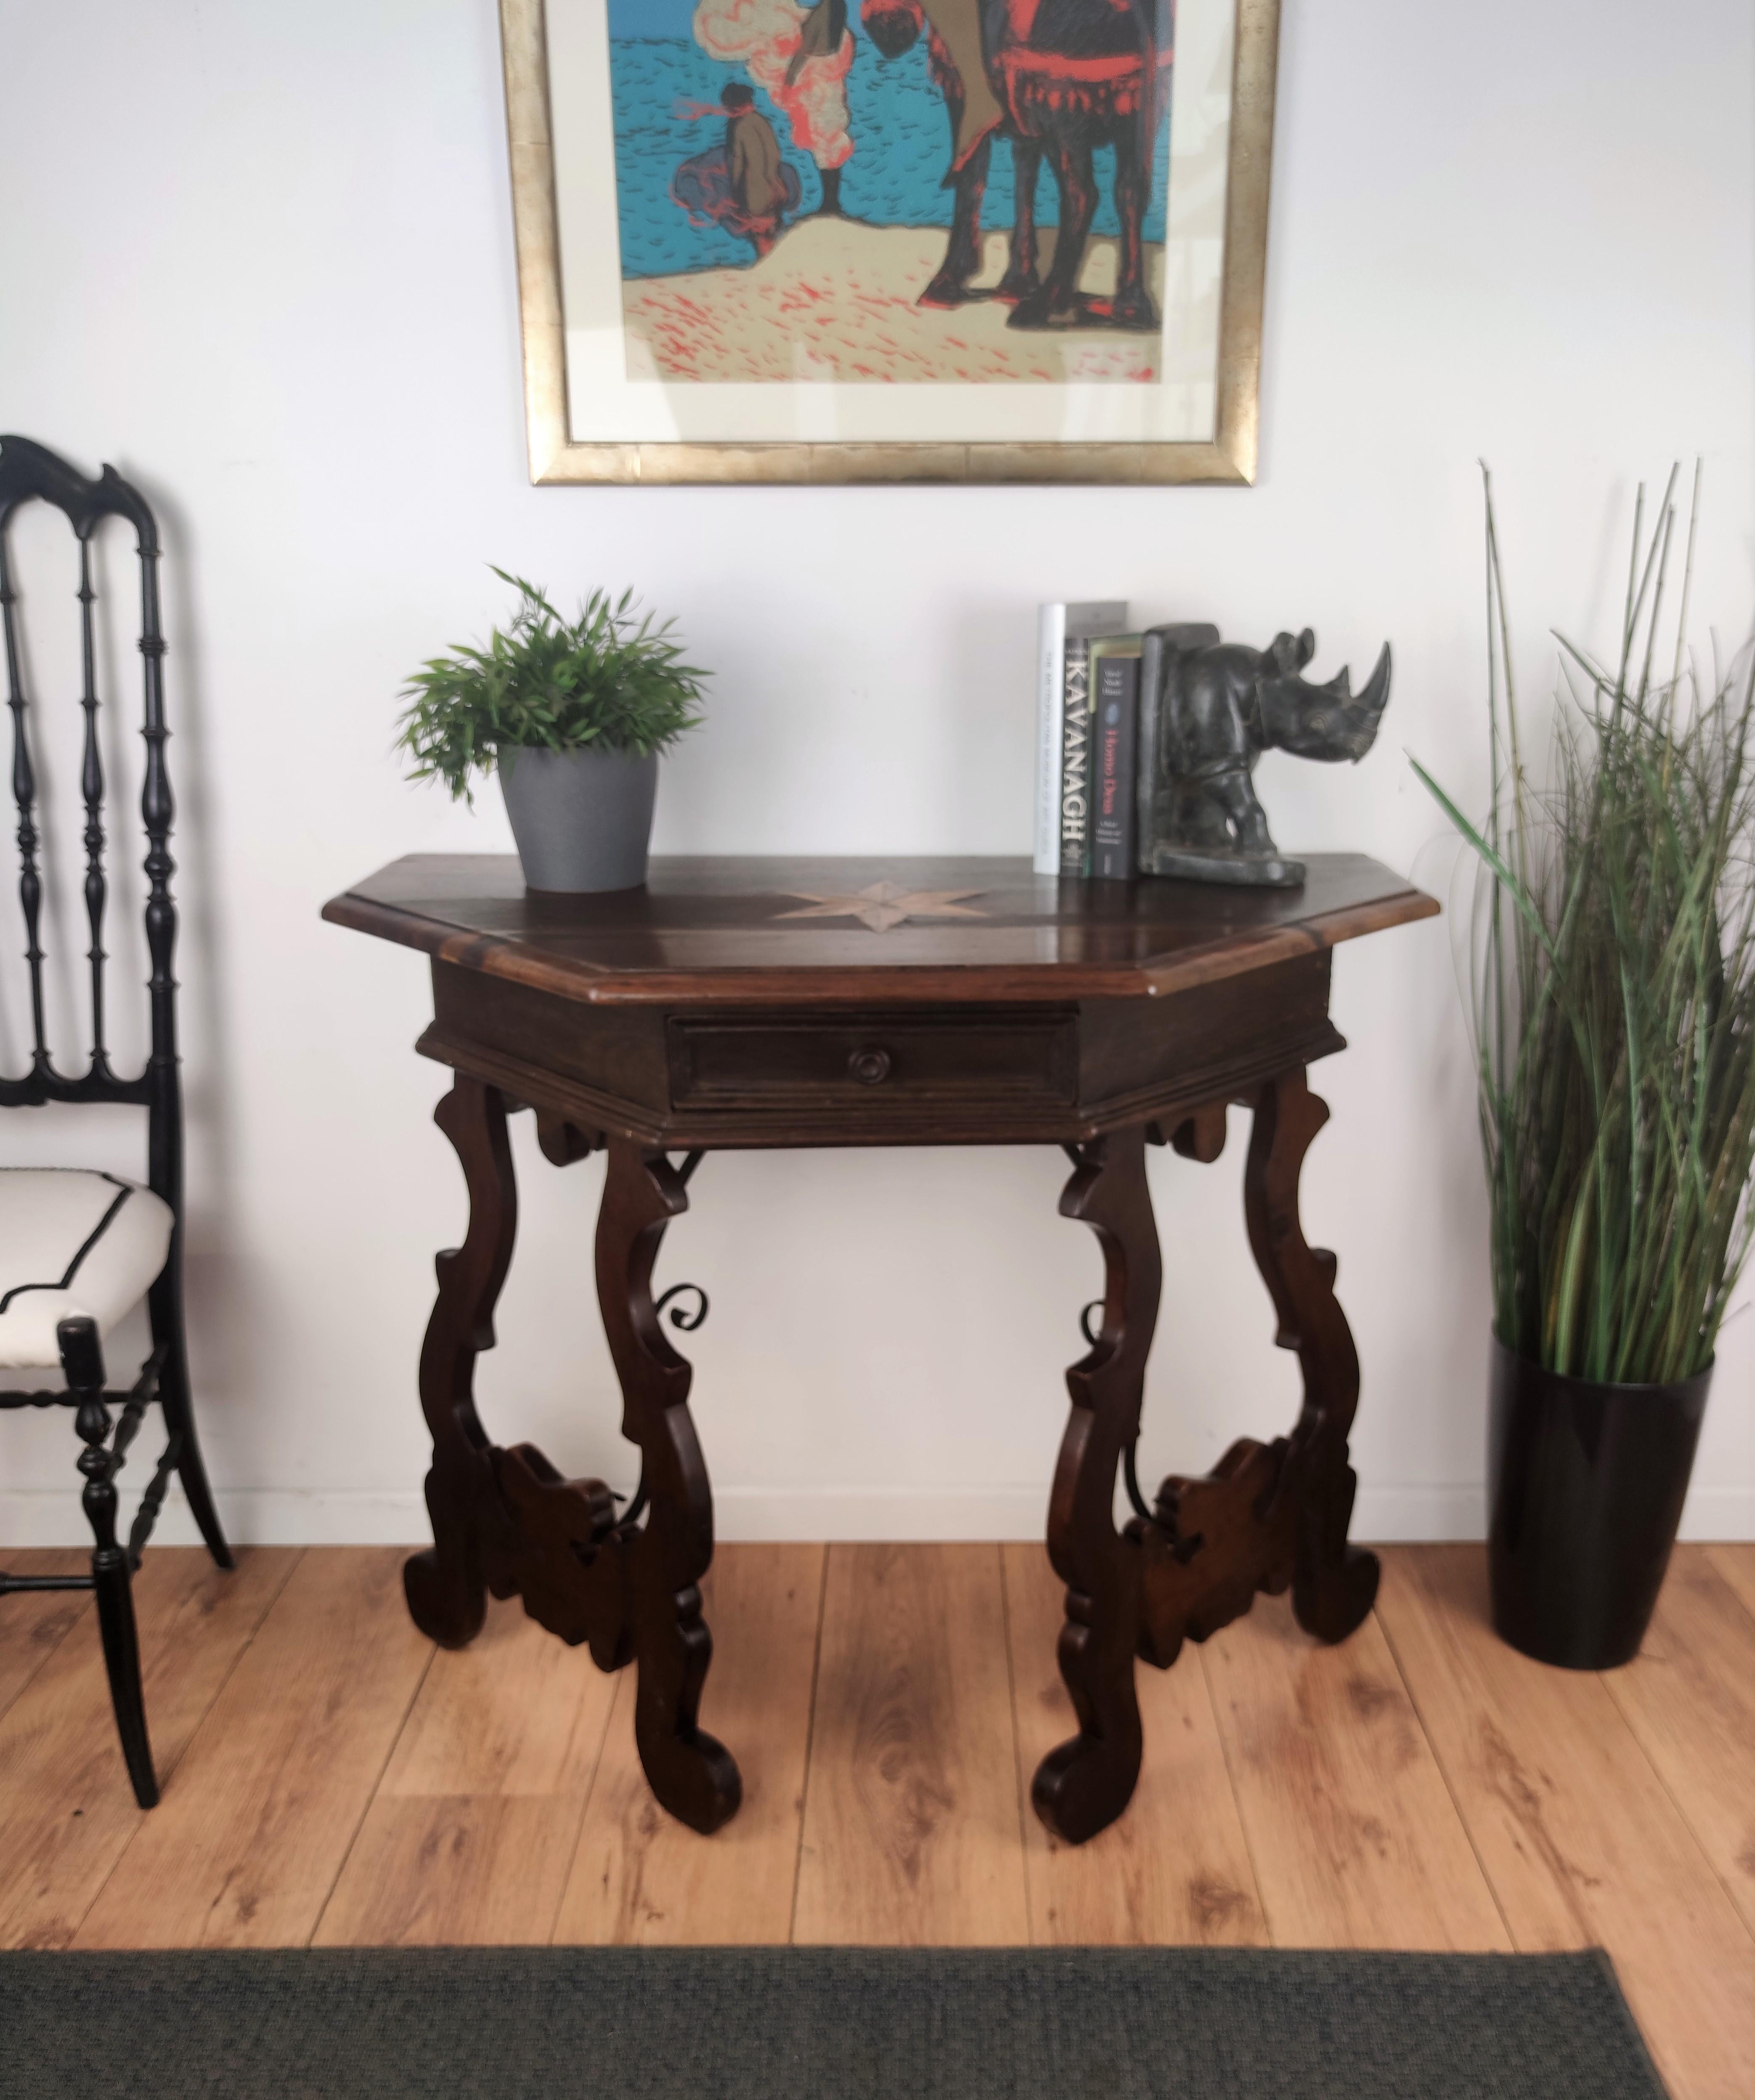 A beautiful 19th century baroque console table made of solid walnut with lyre shaped legs joined by wrought iron stretchers. Inlay decoration on the beveled top and a central drawer on the front. Beautiful grain and nice character to the wood with